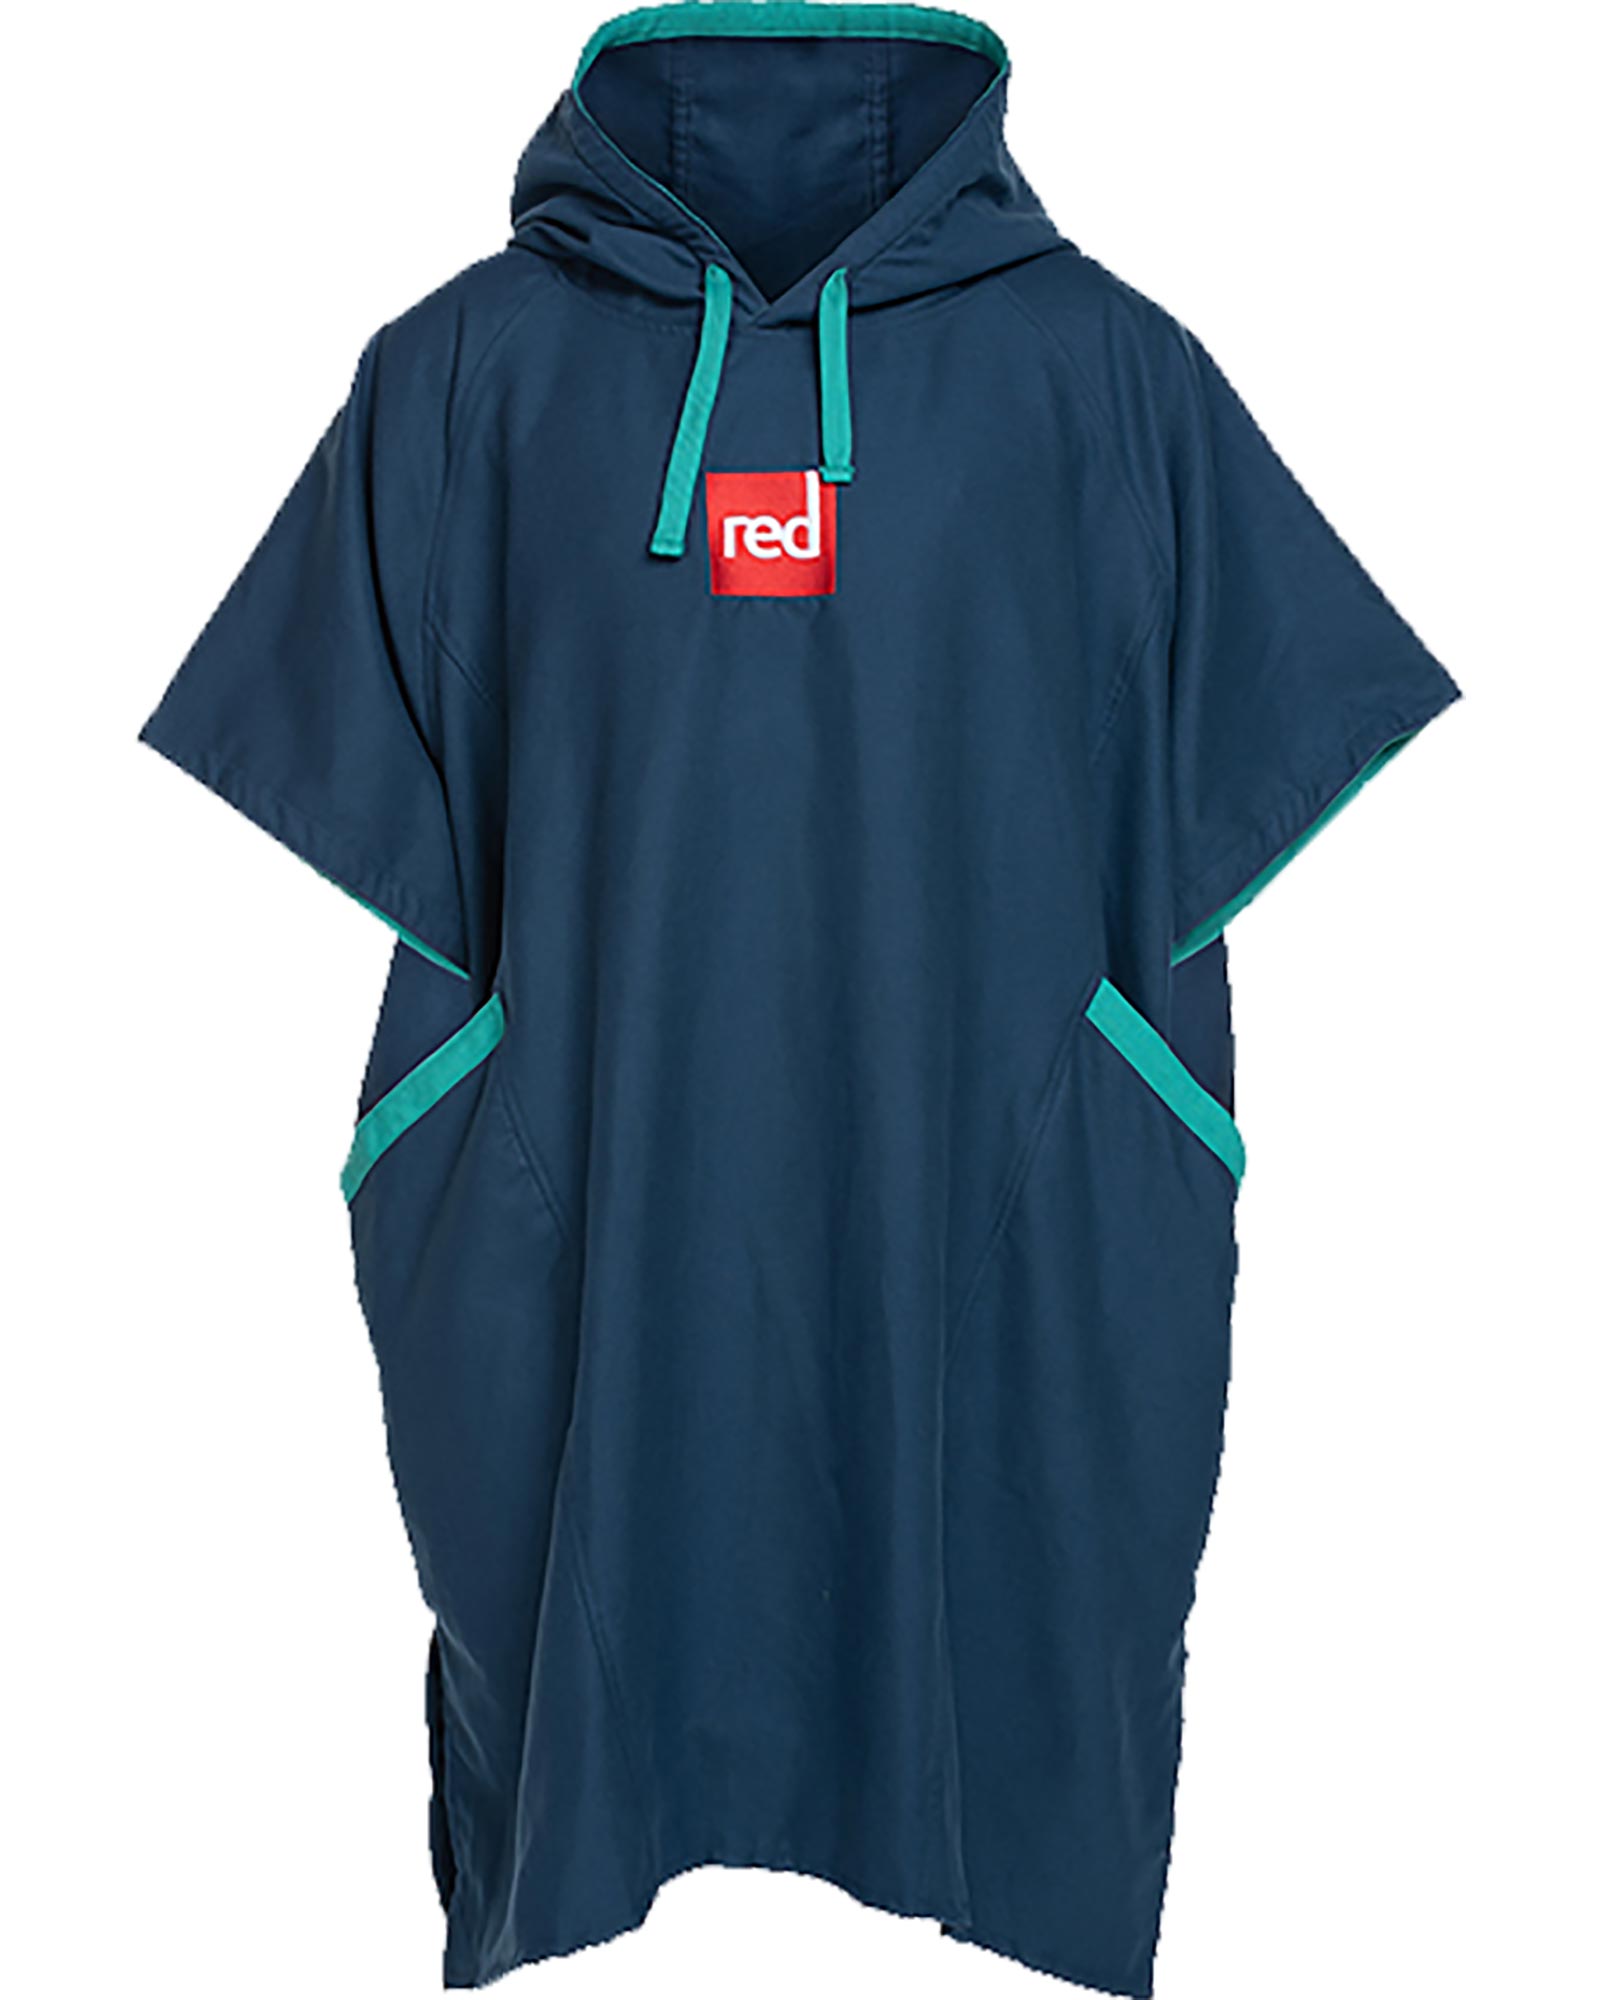 Red Paddle Co Quick Dry Kids Change Robe